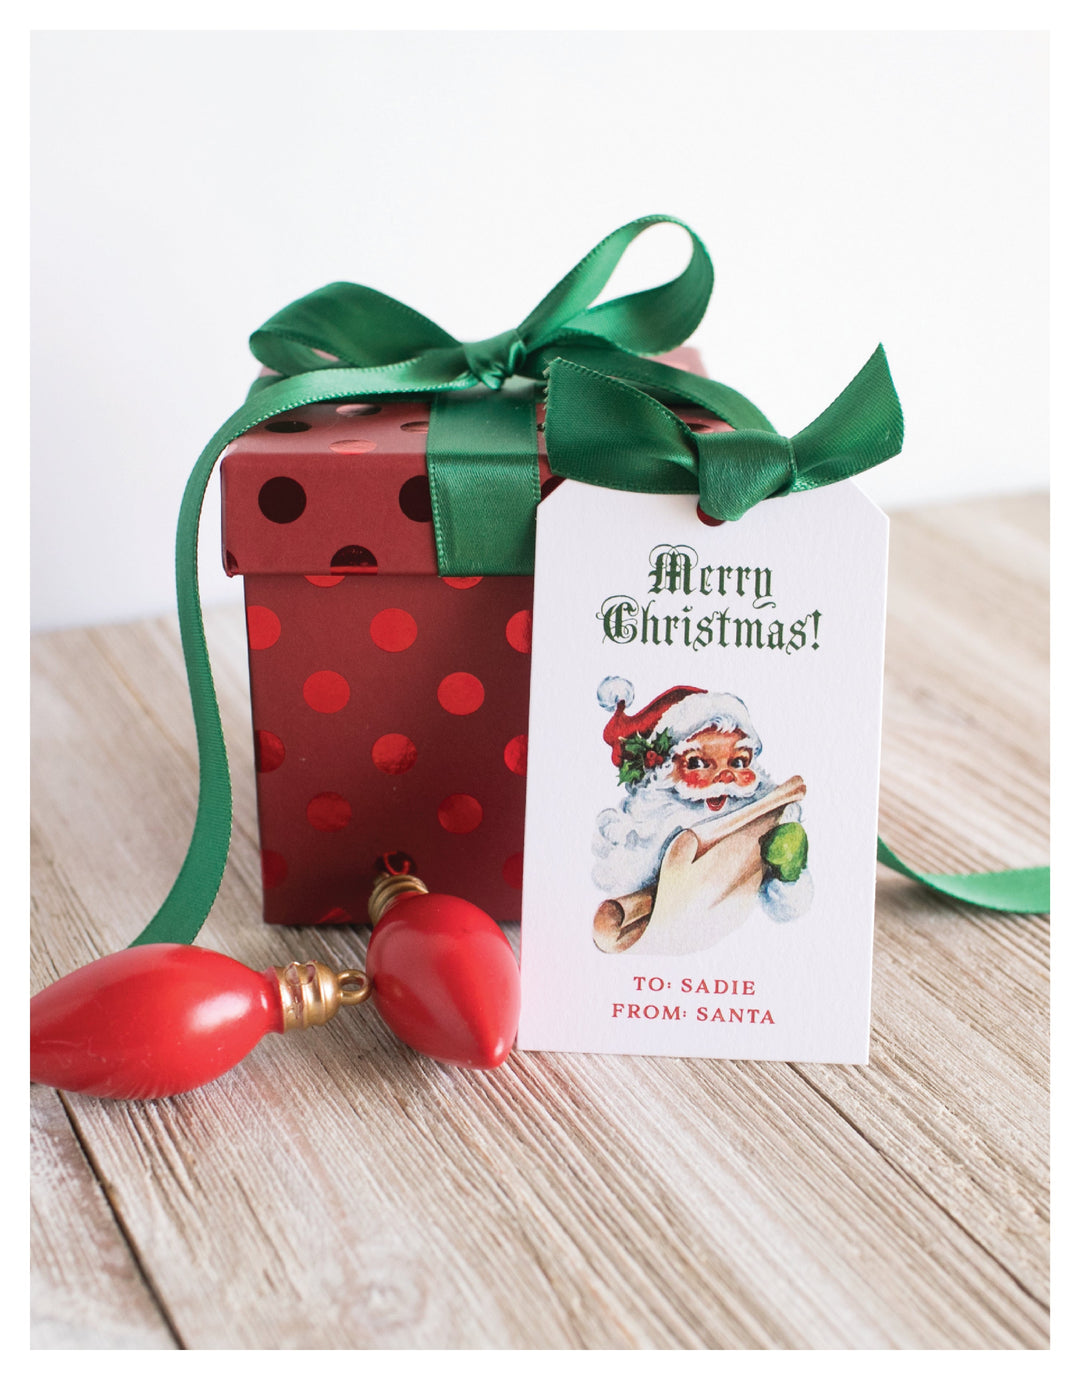 The Missy Christmas Gift Tag